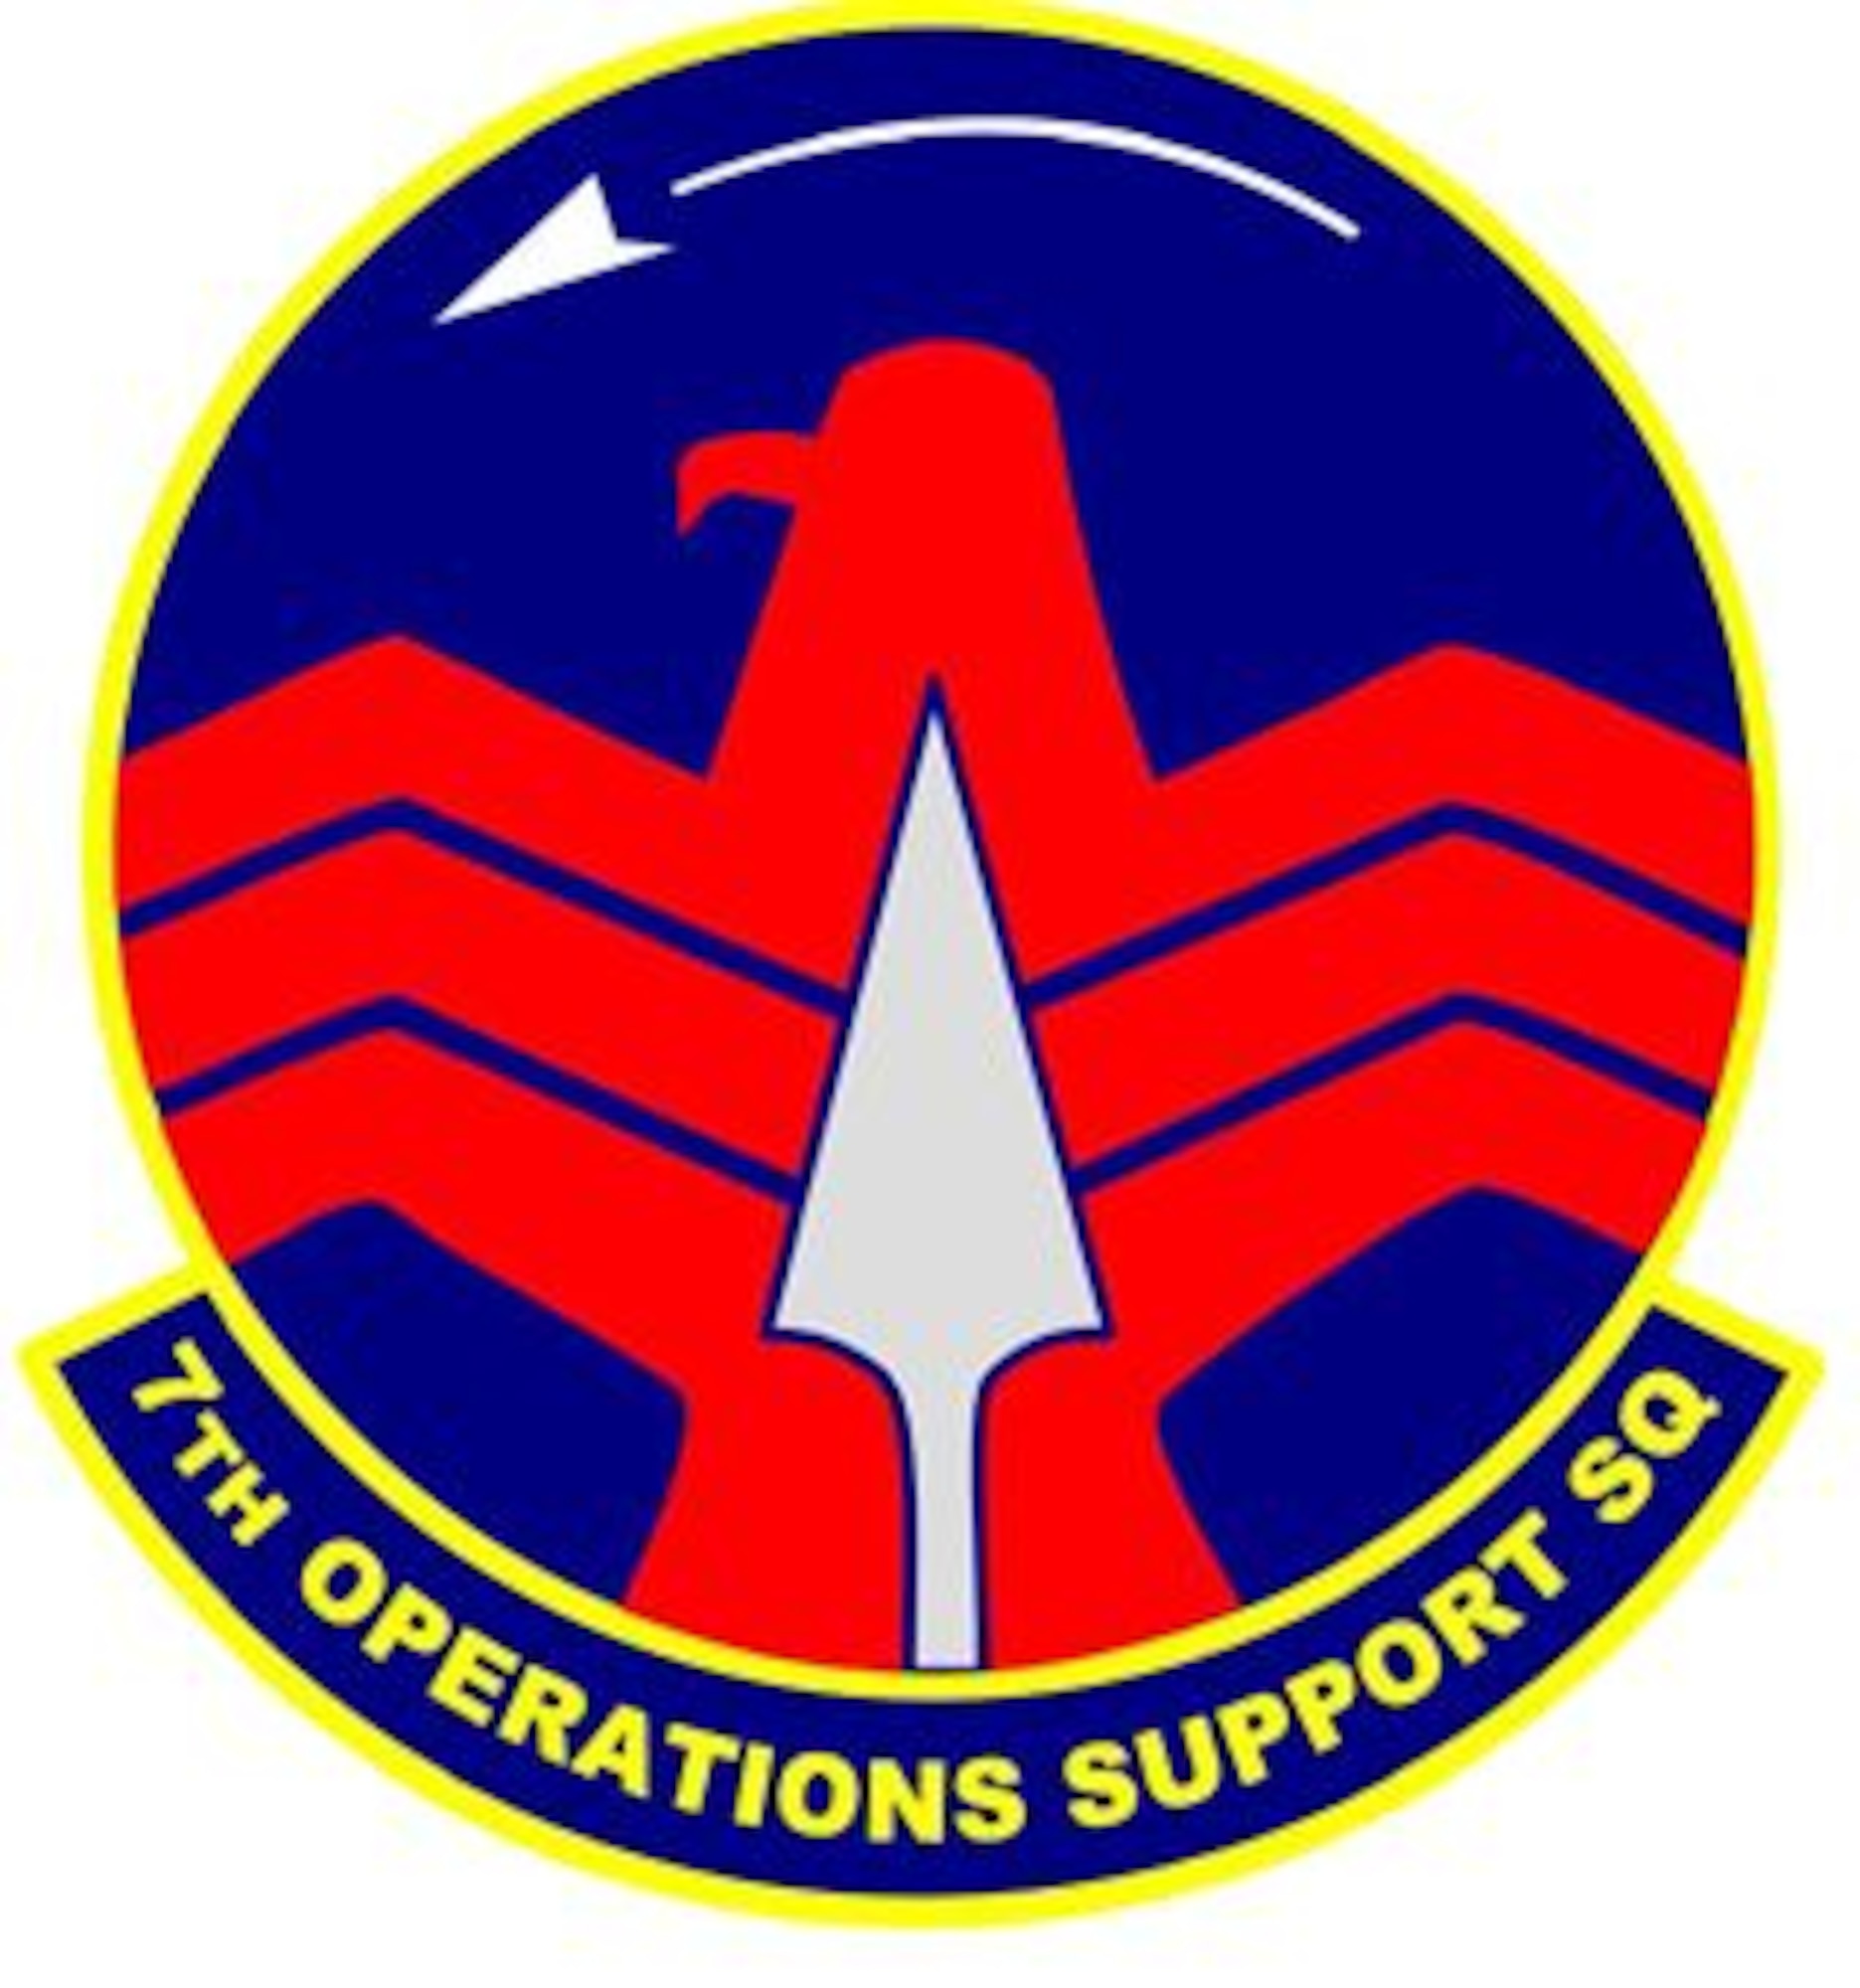 7th Operations Support Squadron shield (color), provided by 7th Bomb Wing Public Affairs.
